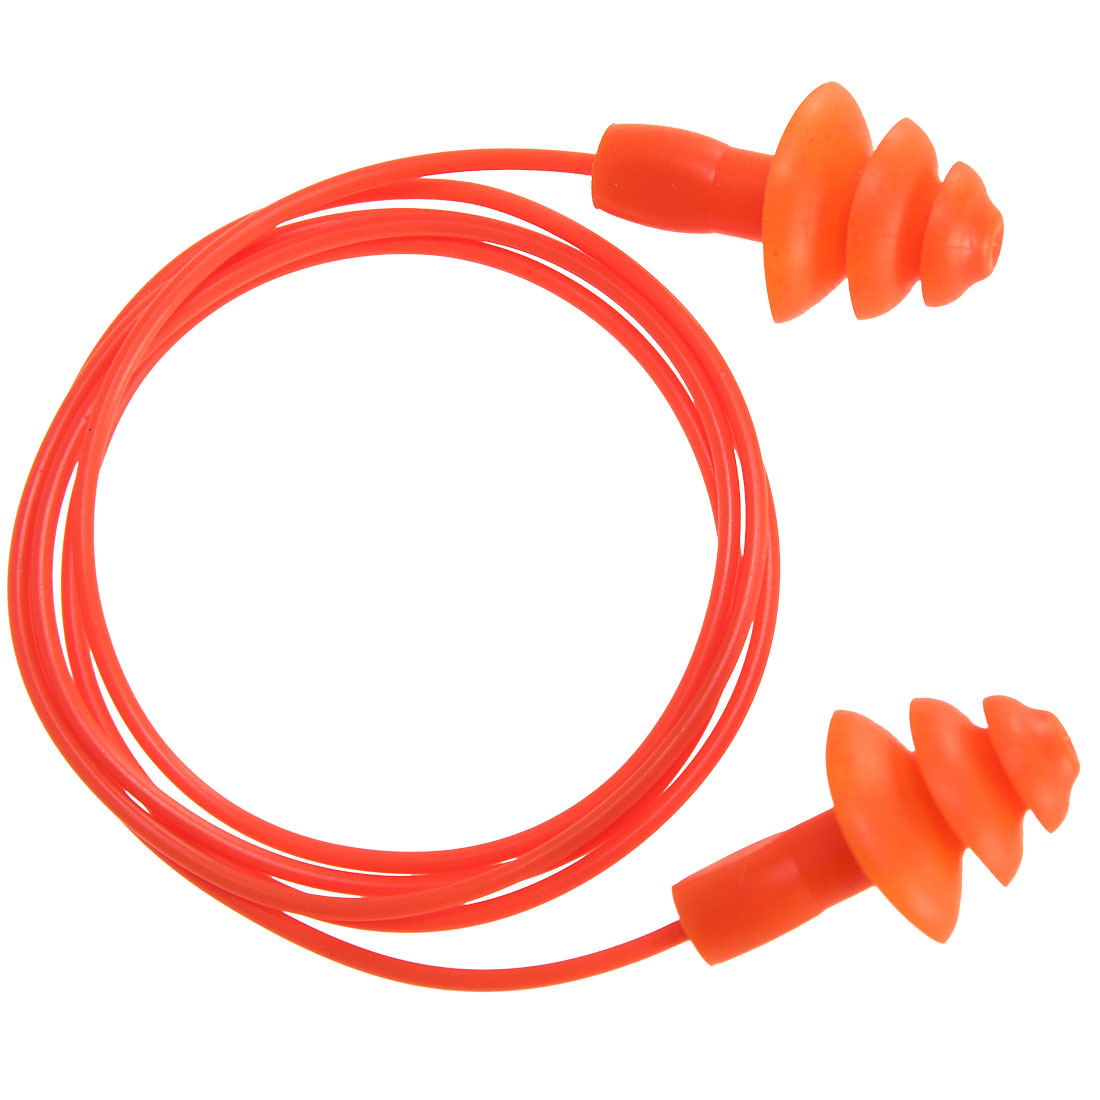 Reusable Corded TPR Ear Plugs ( 50 pairs)